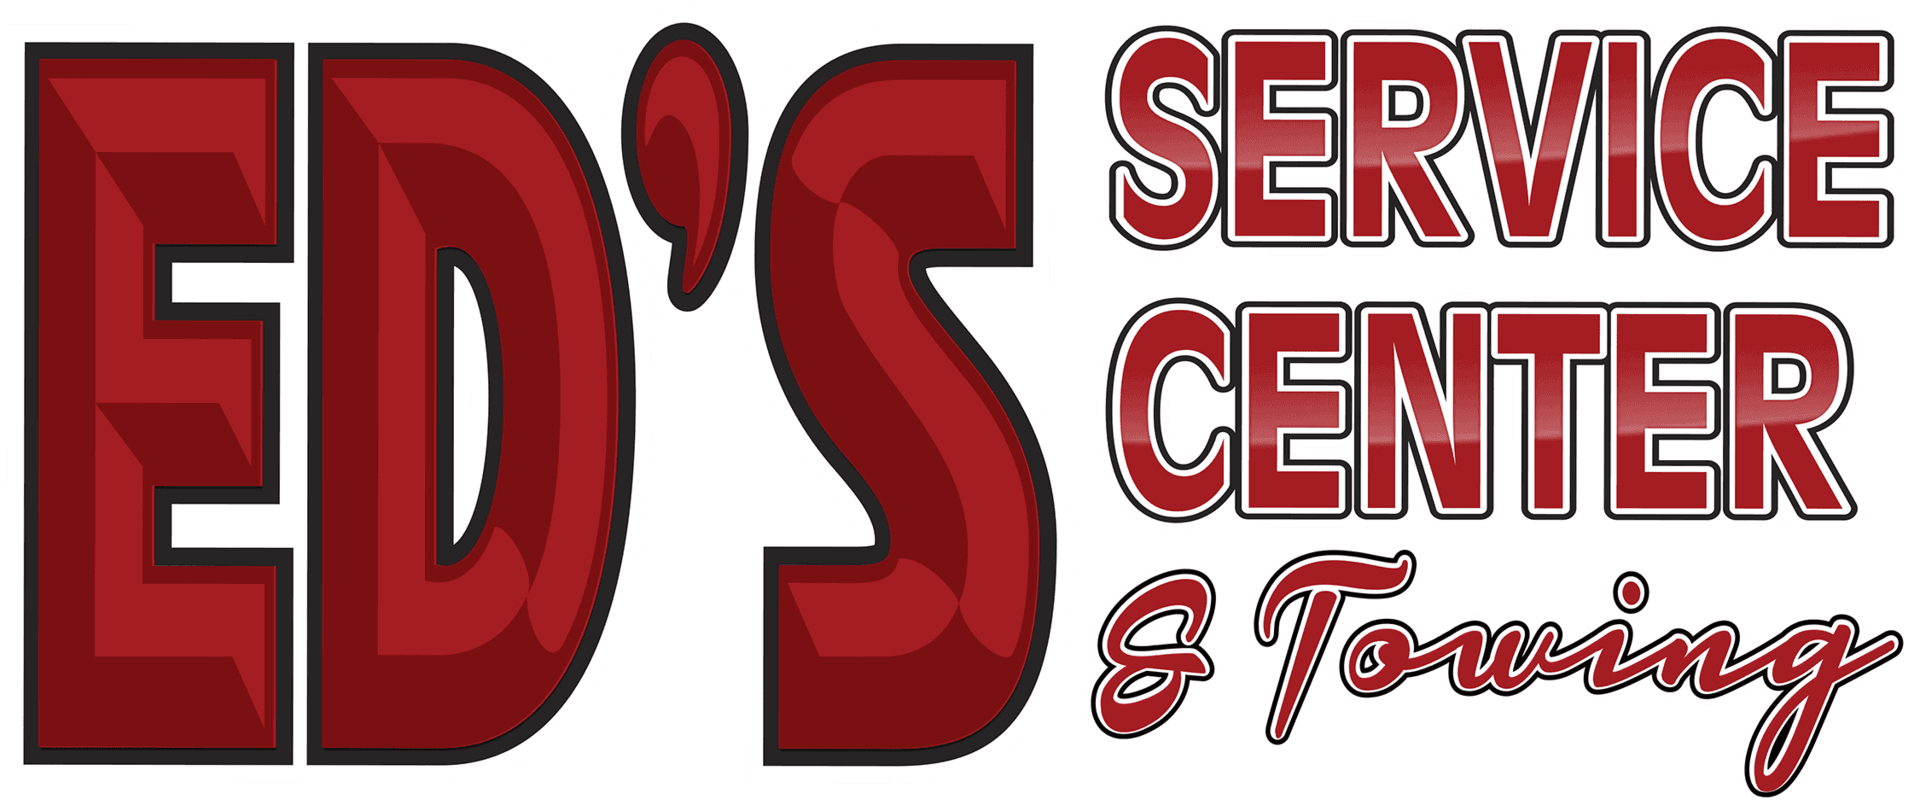 Ed's Service Center and Towing